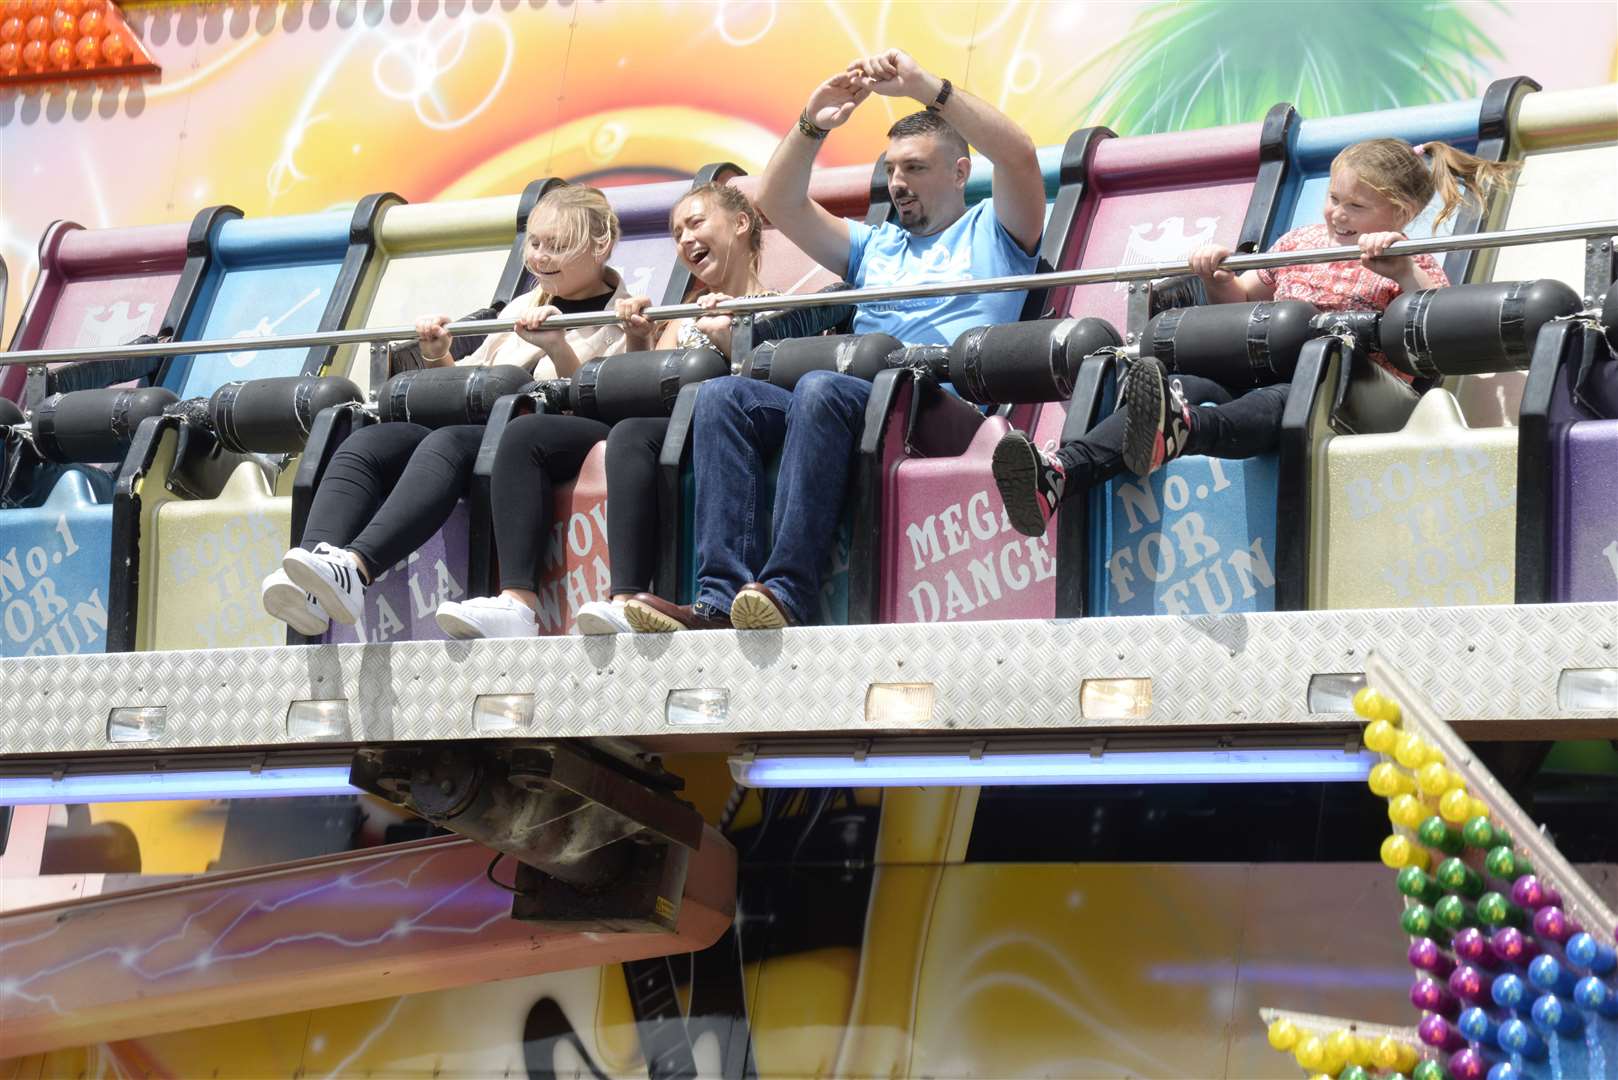 The event is free with charges for the fairground attractions